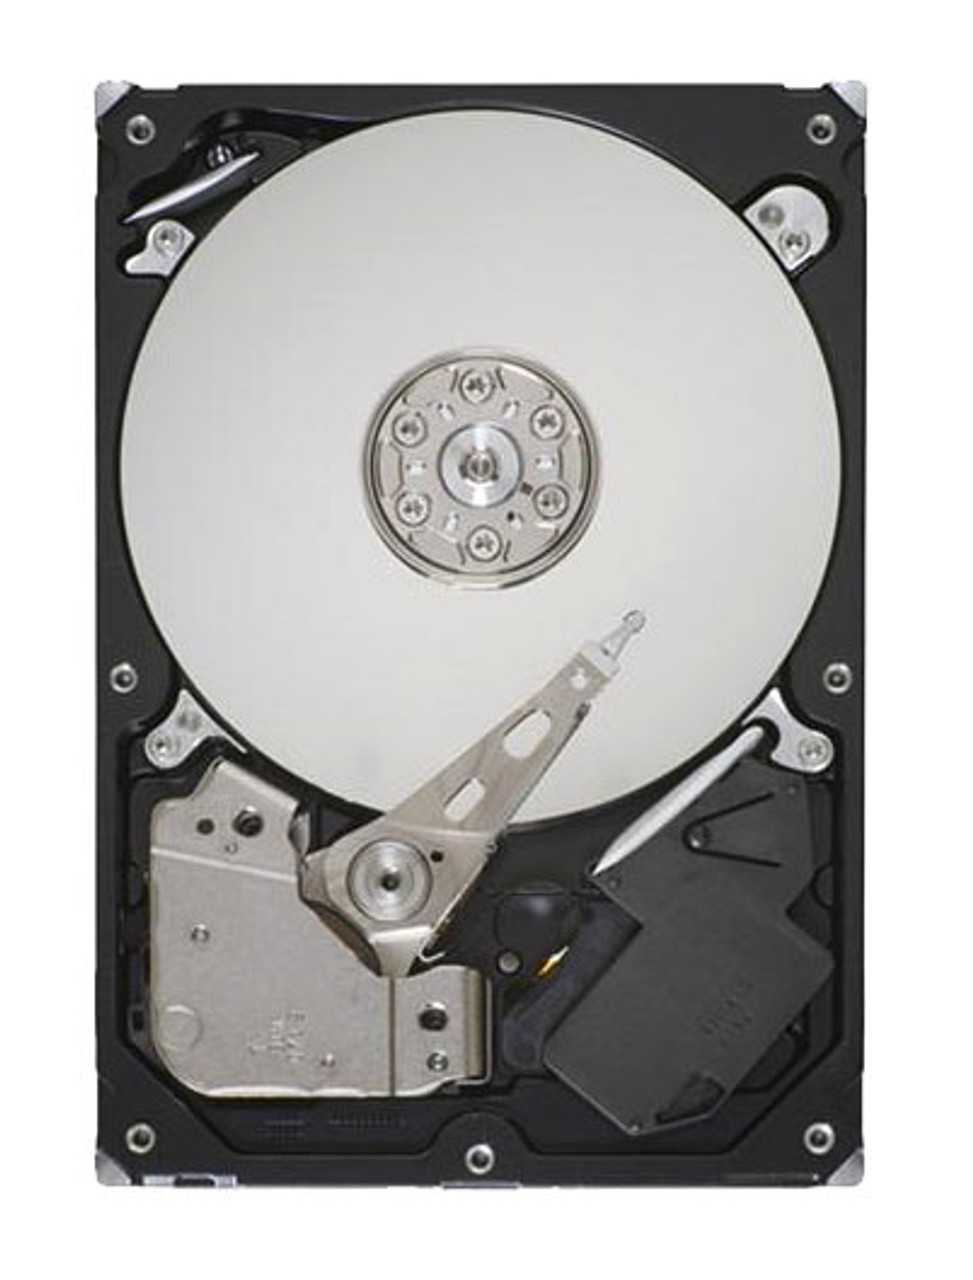 40K6841 IBM 73.4GB 15000RPM Fibre Channel 2Gbps 8MB Cache 3.5-inch Internal Hard Drive for TotalStorage DS4700